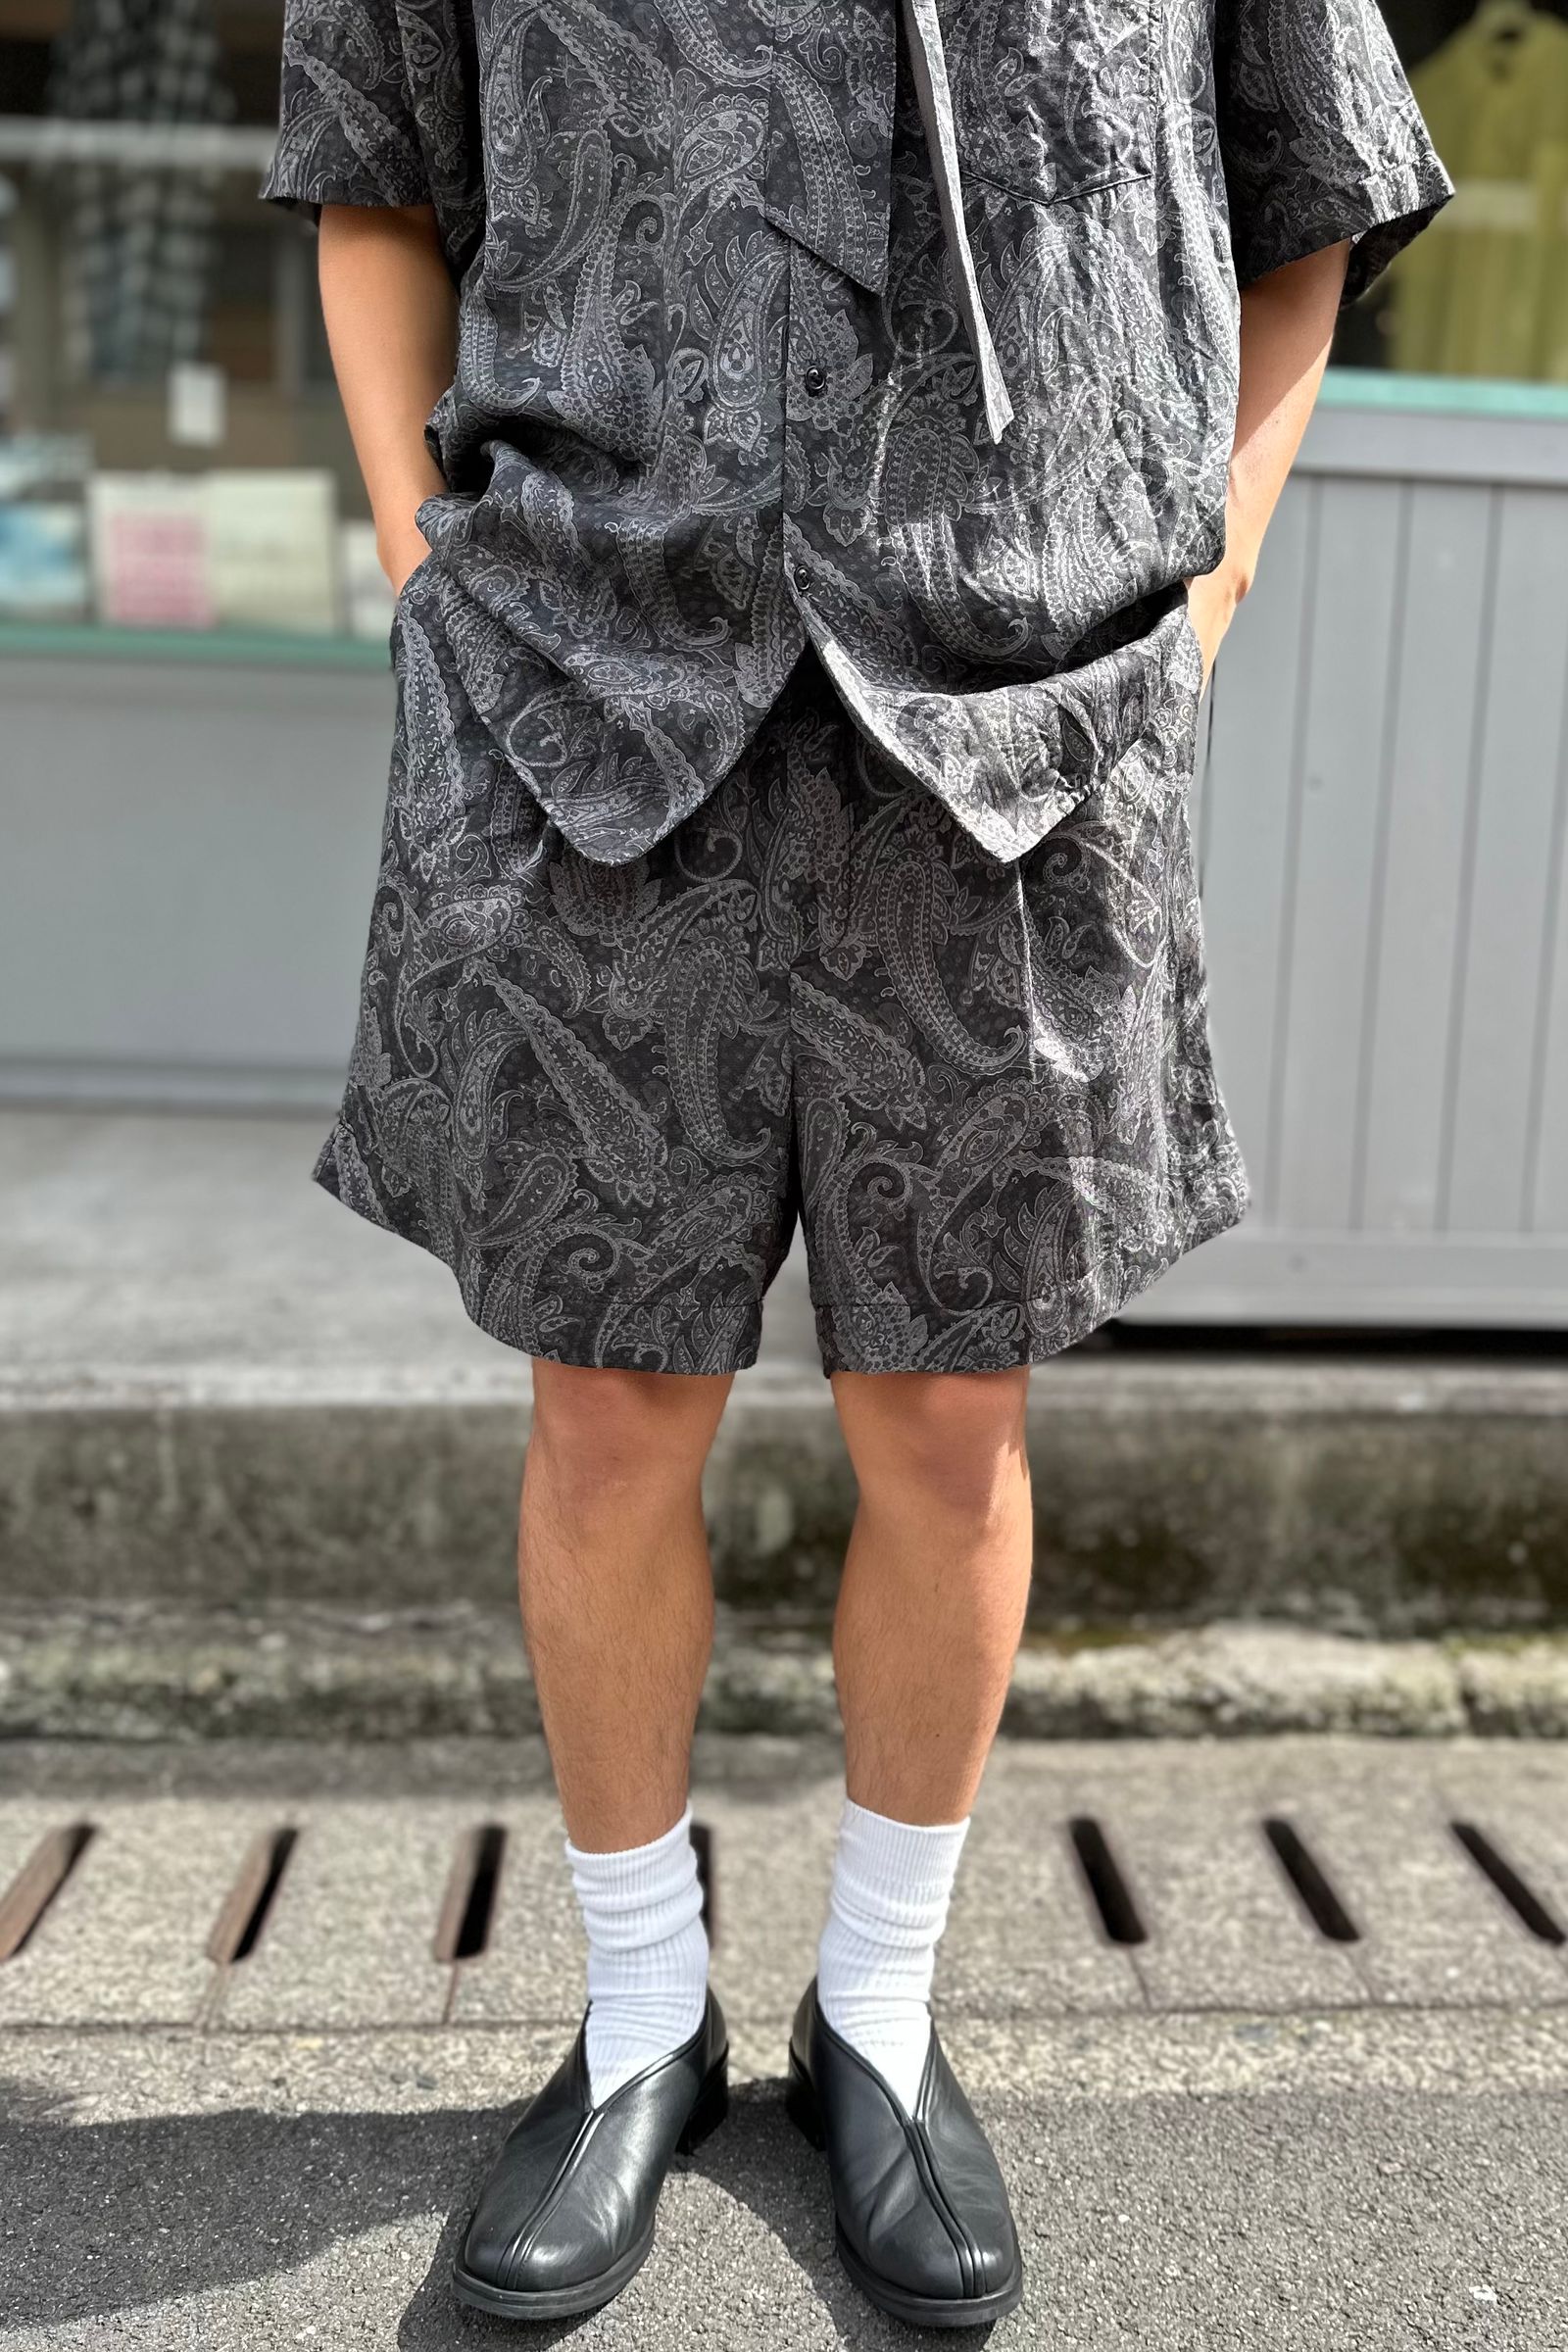 WEWILL - PAISLEY BAGGY SHORTS -Gray- 23Mid summer | asterisk